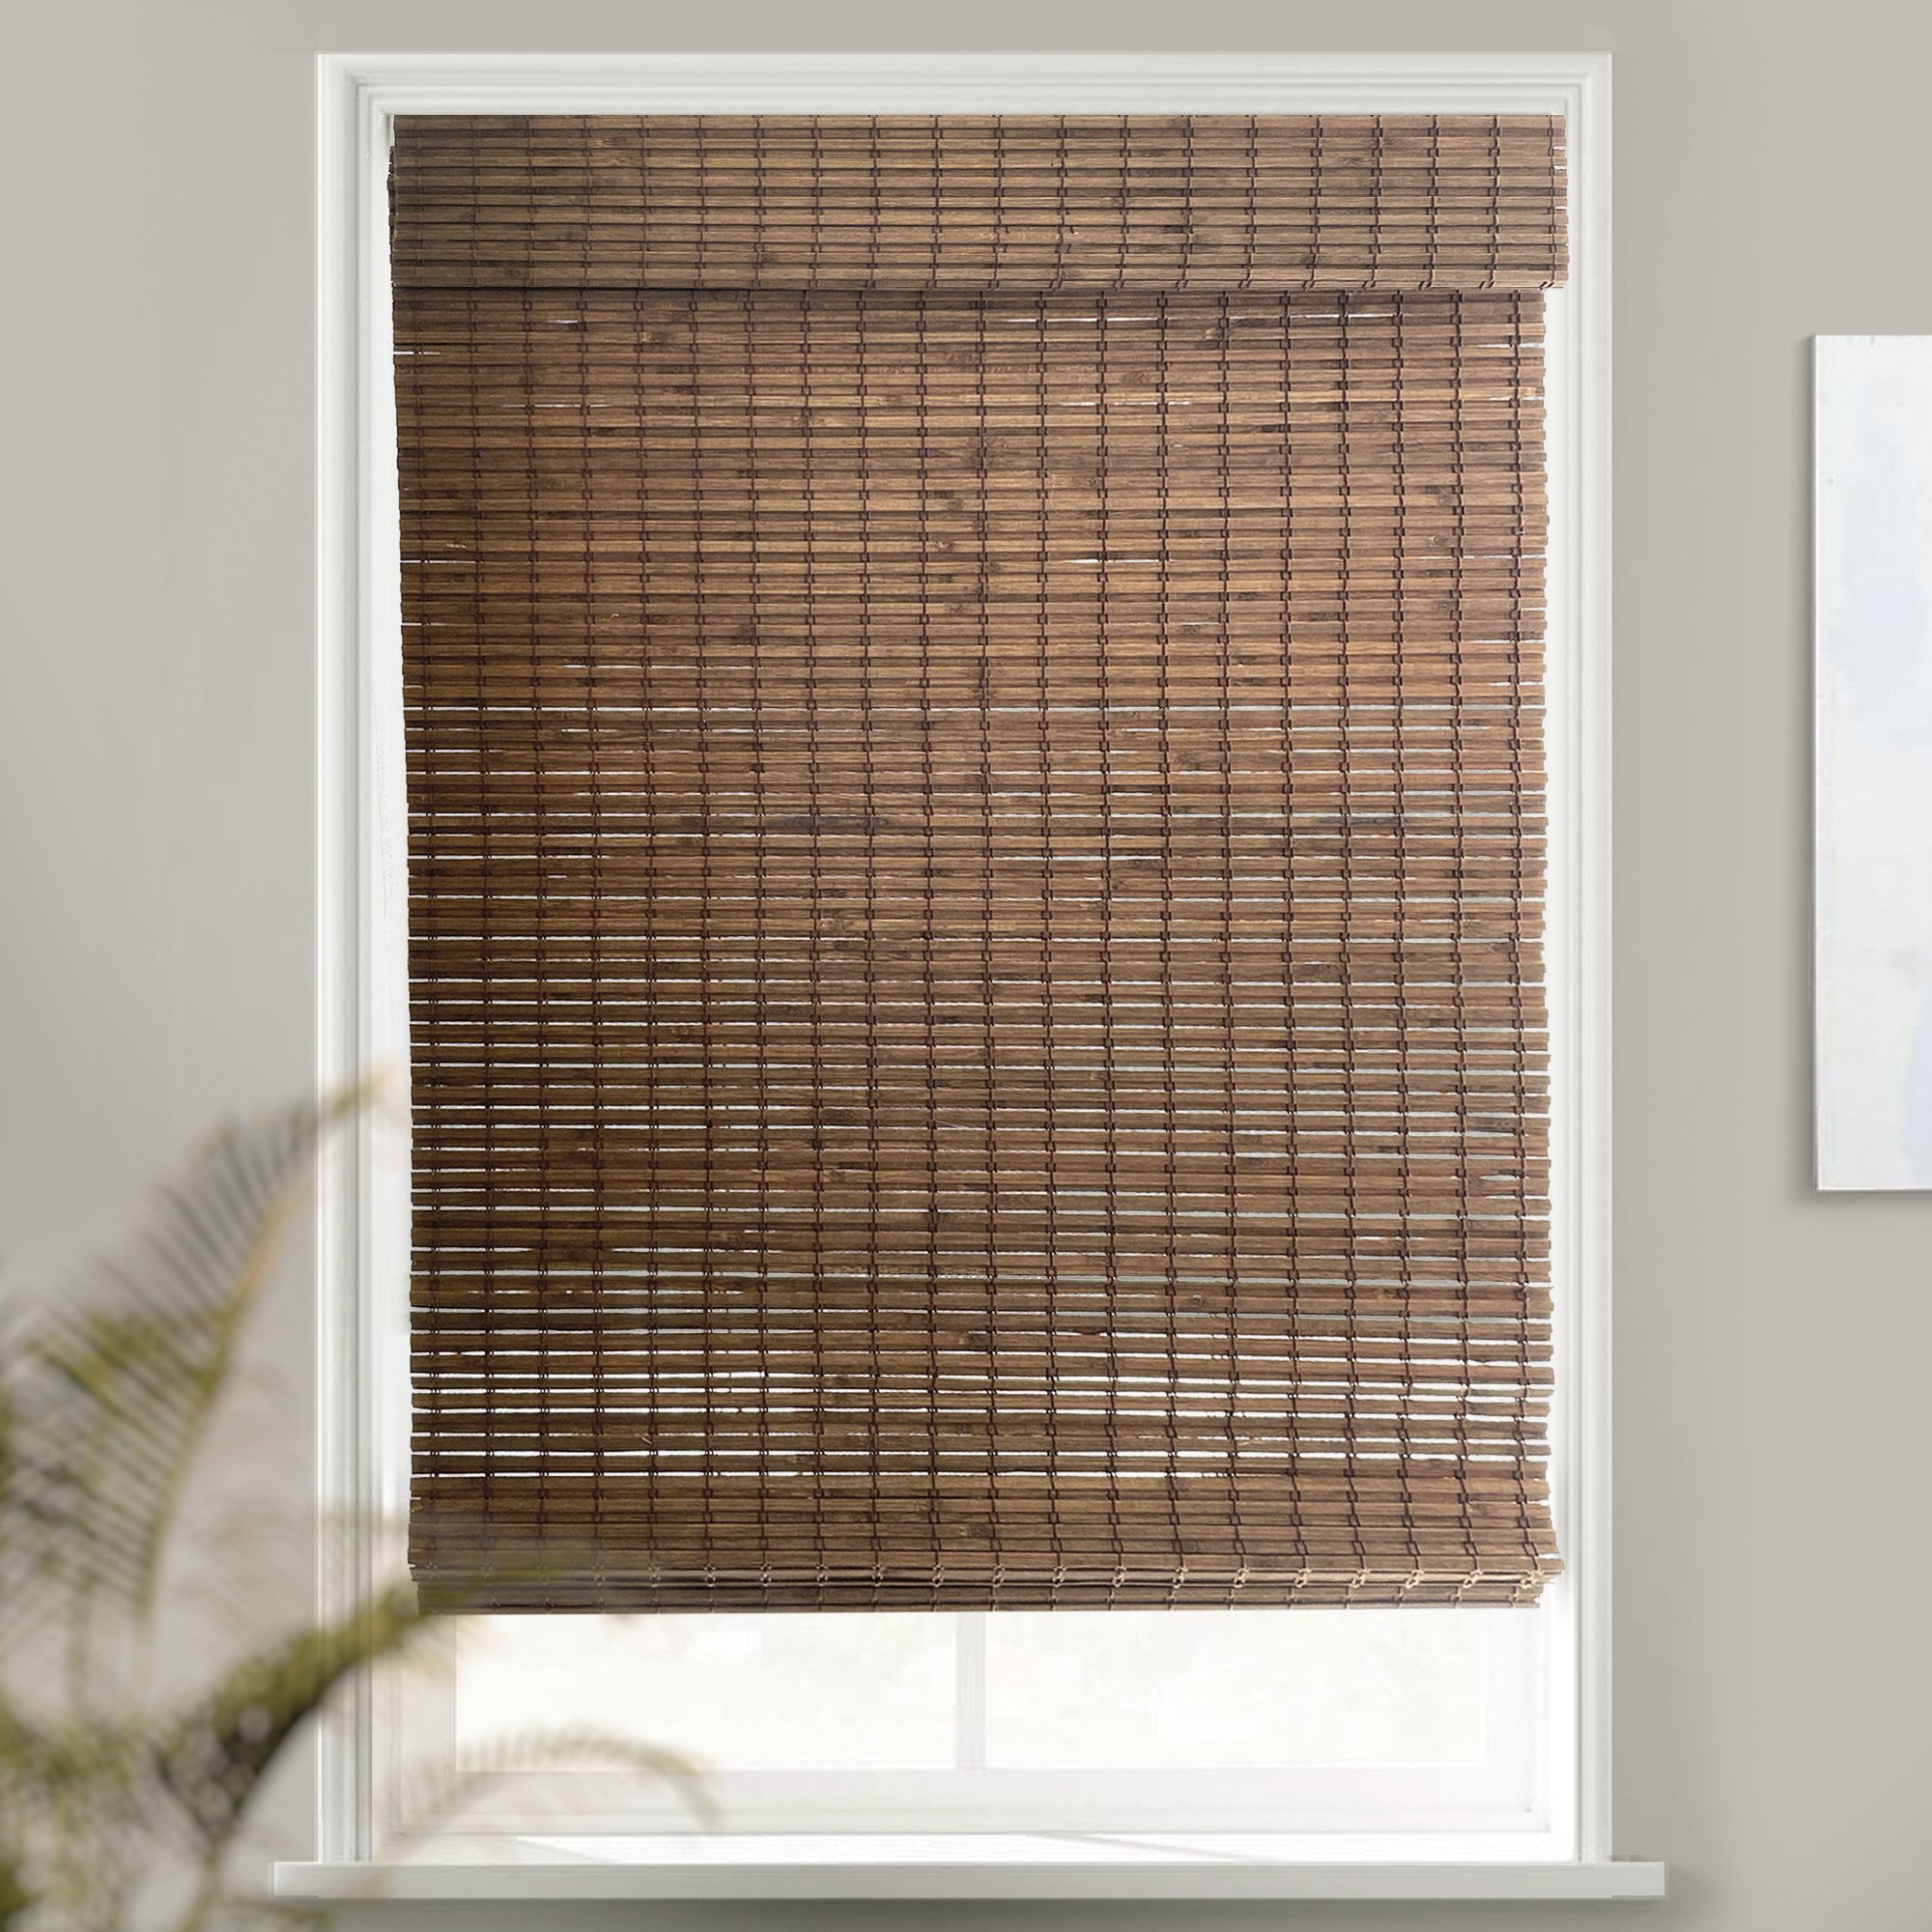 Details about   Indoor Outdoor Window Blinds Natural Bamboo Roll Up Shade Sun 4-6 in 2 Colors 